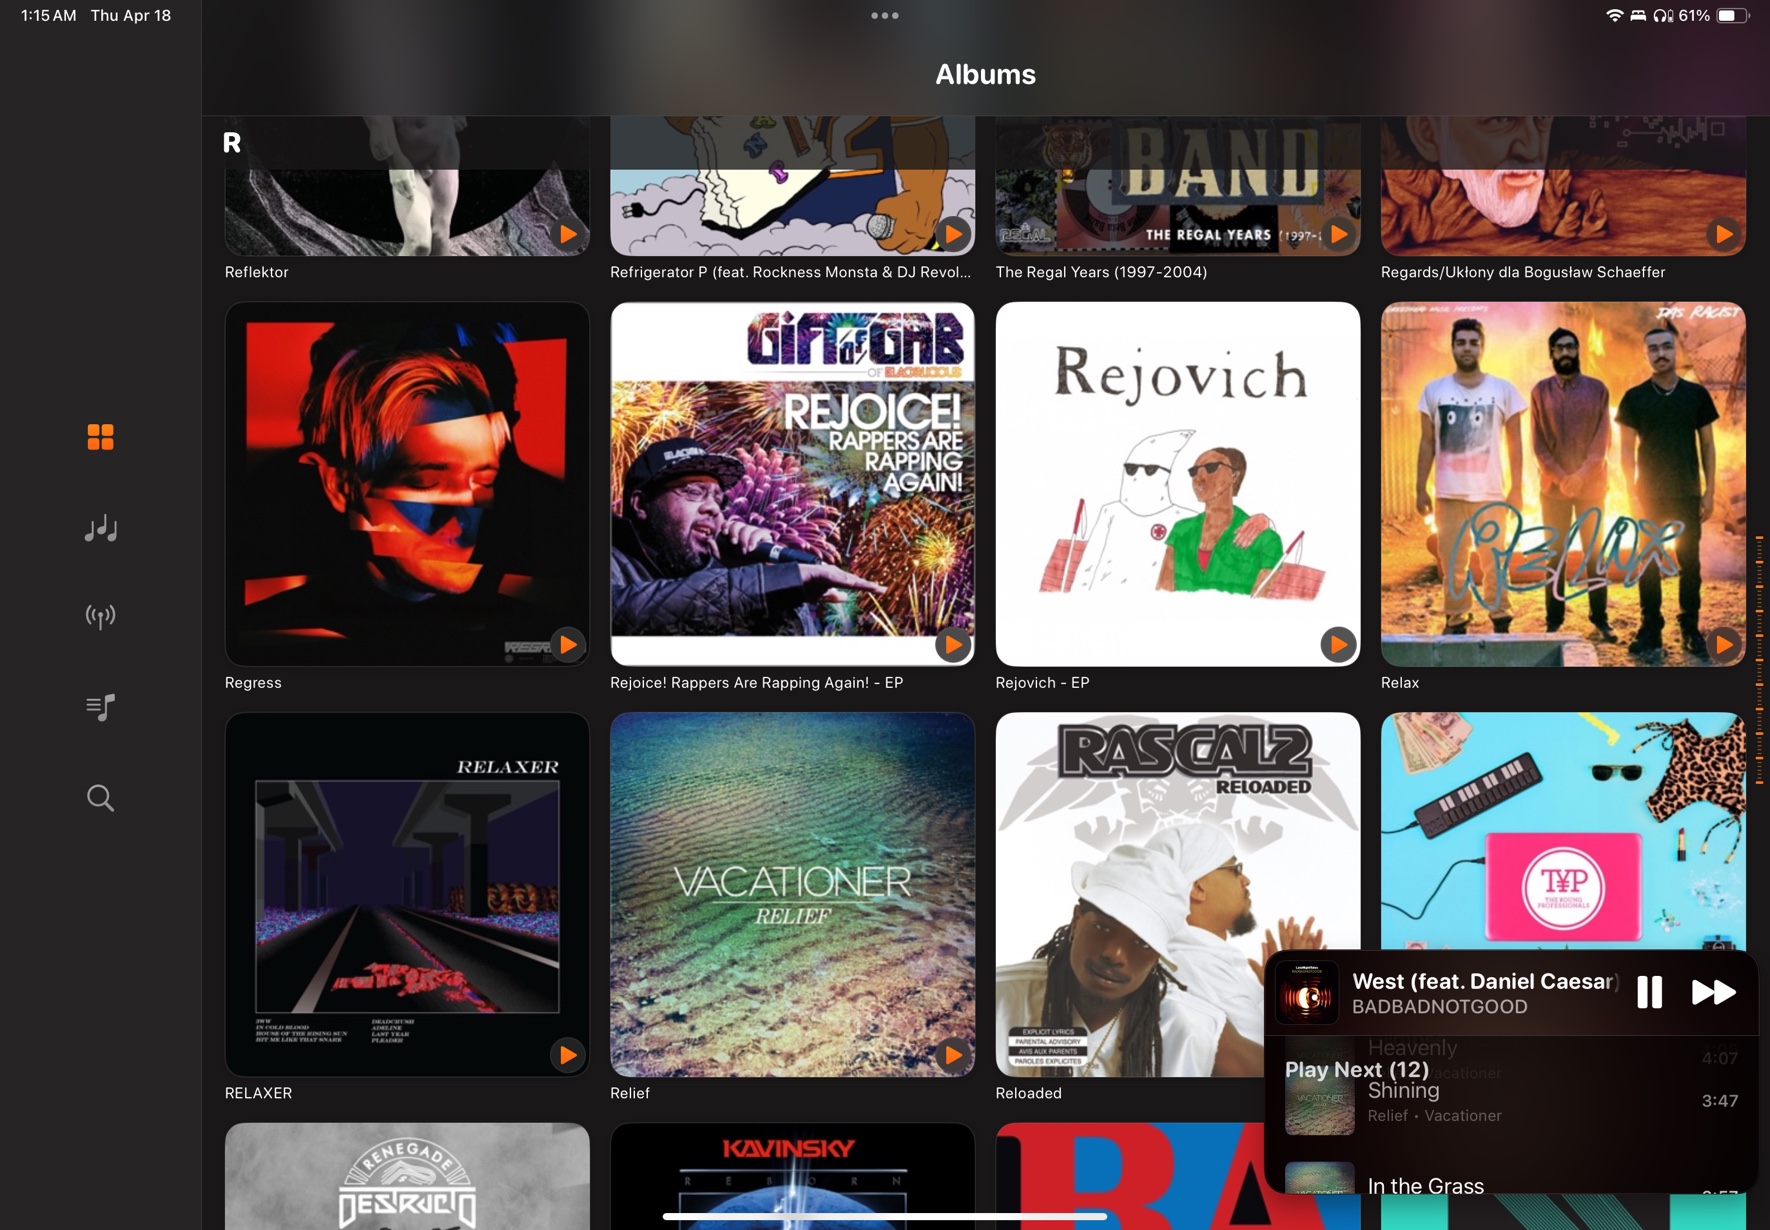 Screenshot of Wave app showing the albums grid view.